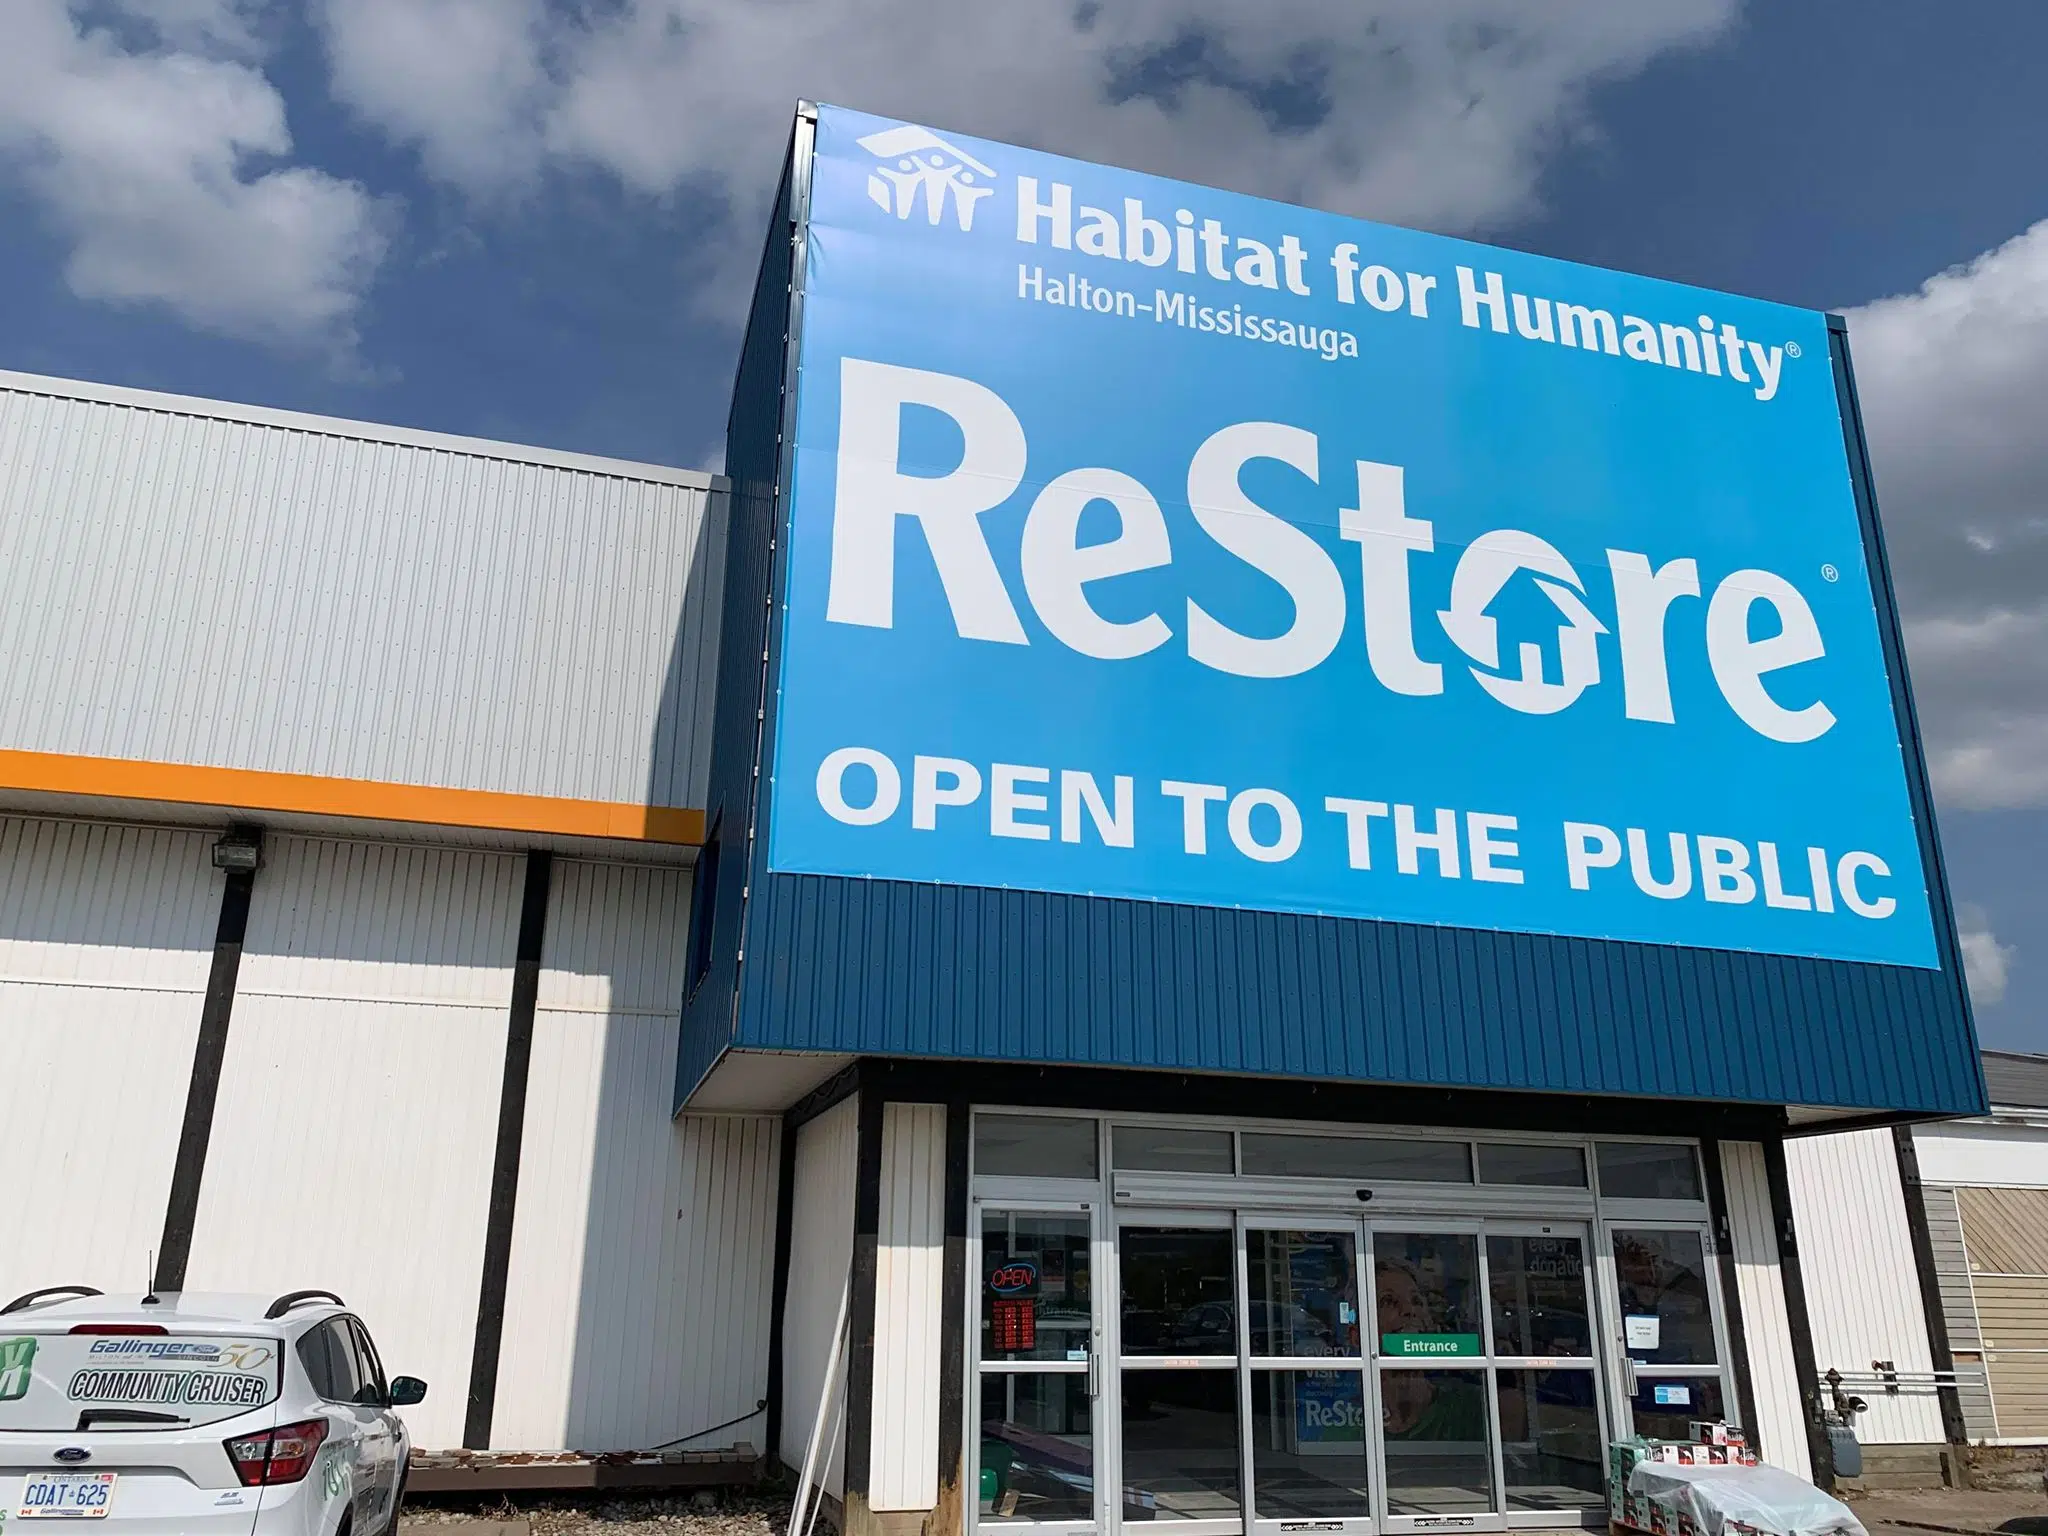 Fundraising continues to strong for Habitat for Humanity Halton-Mississauga